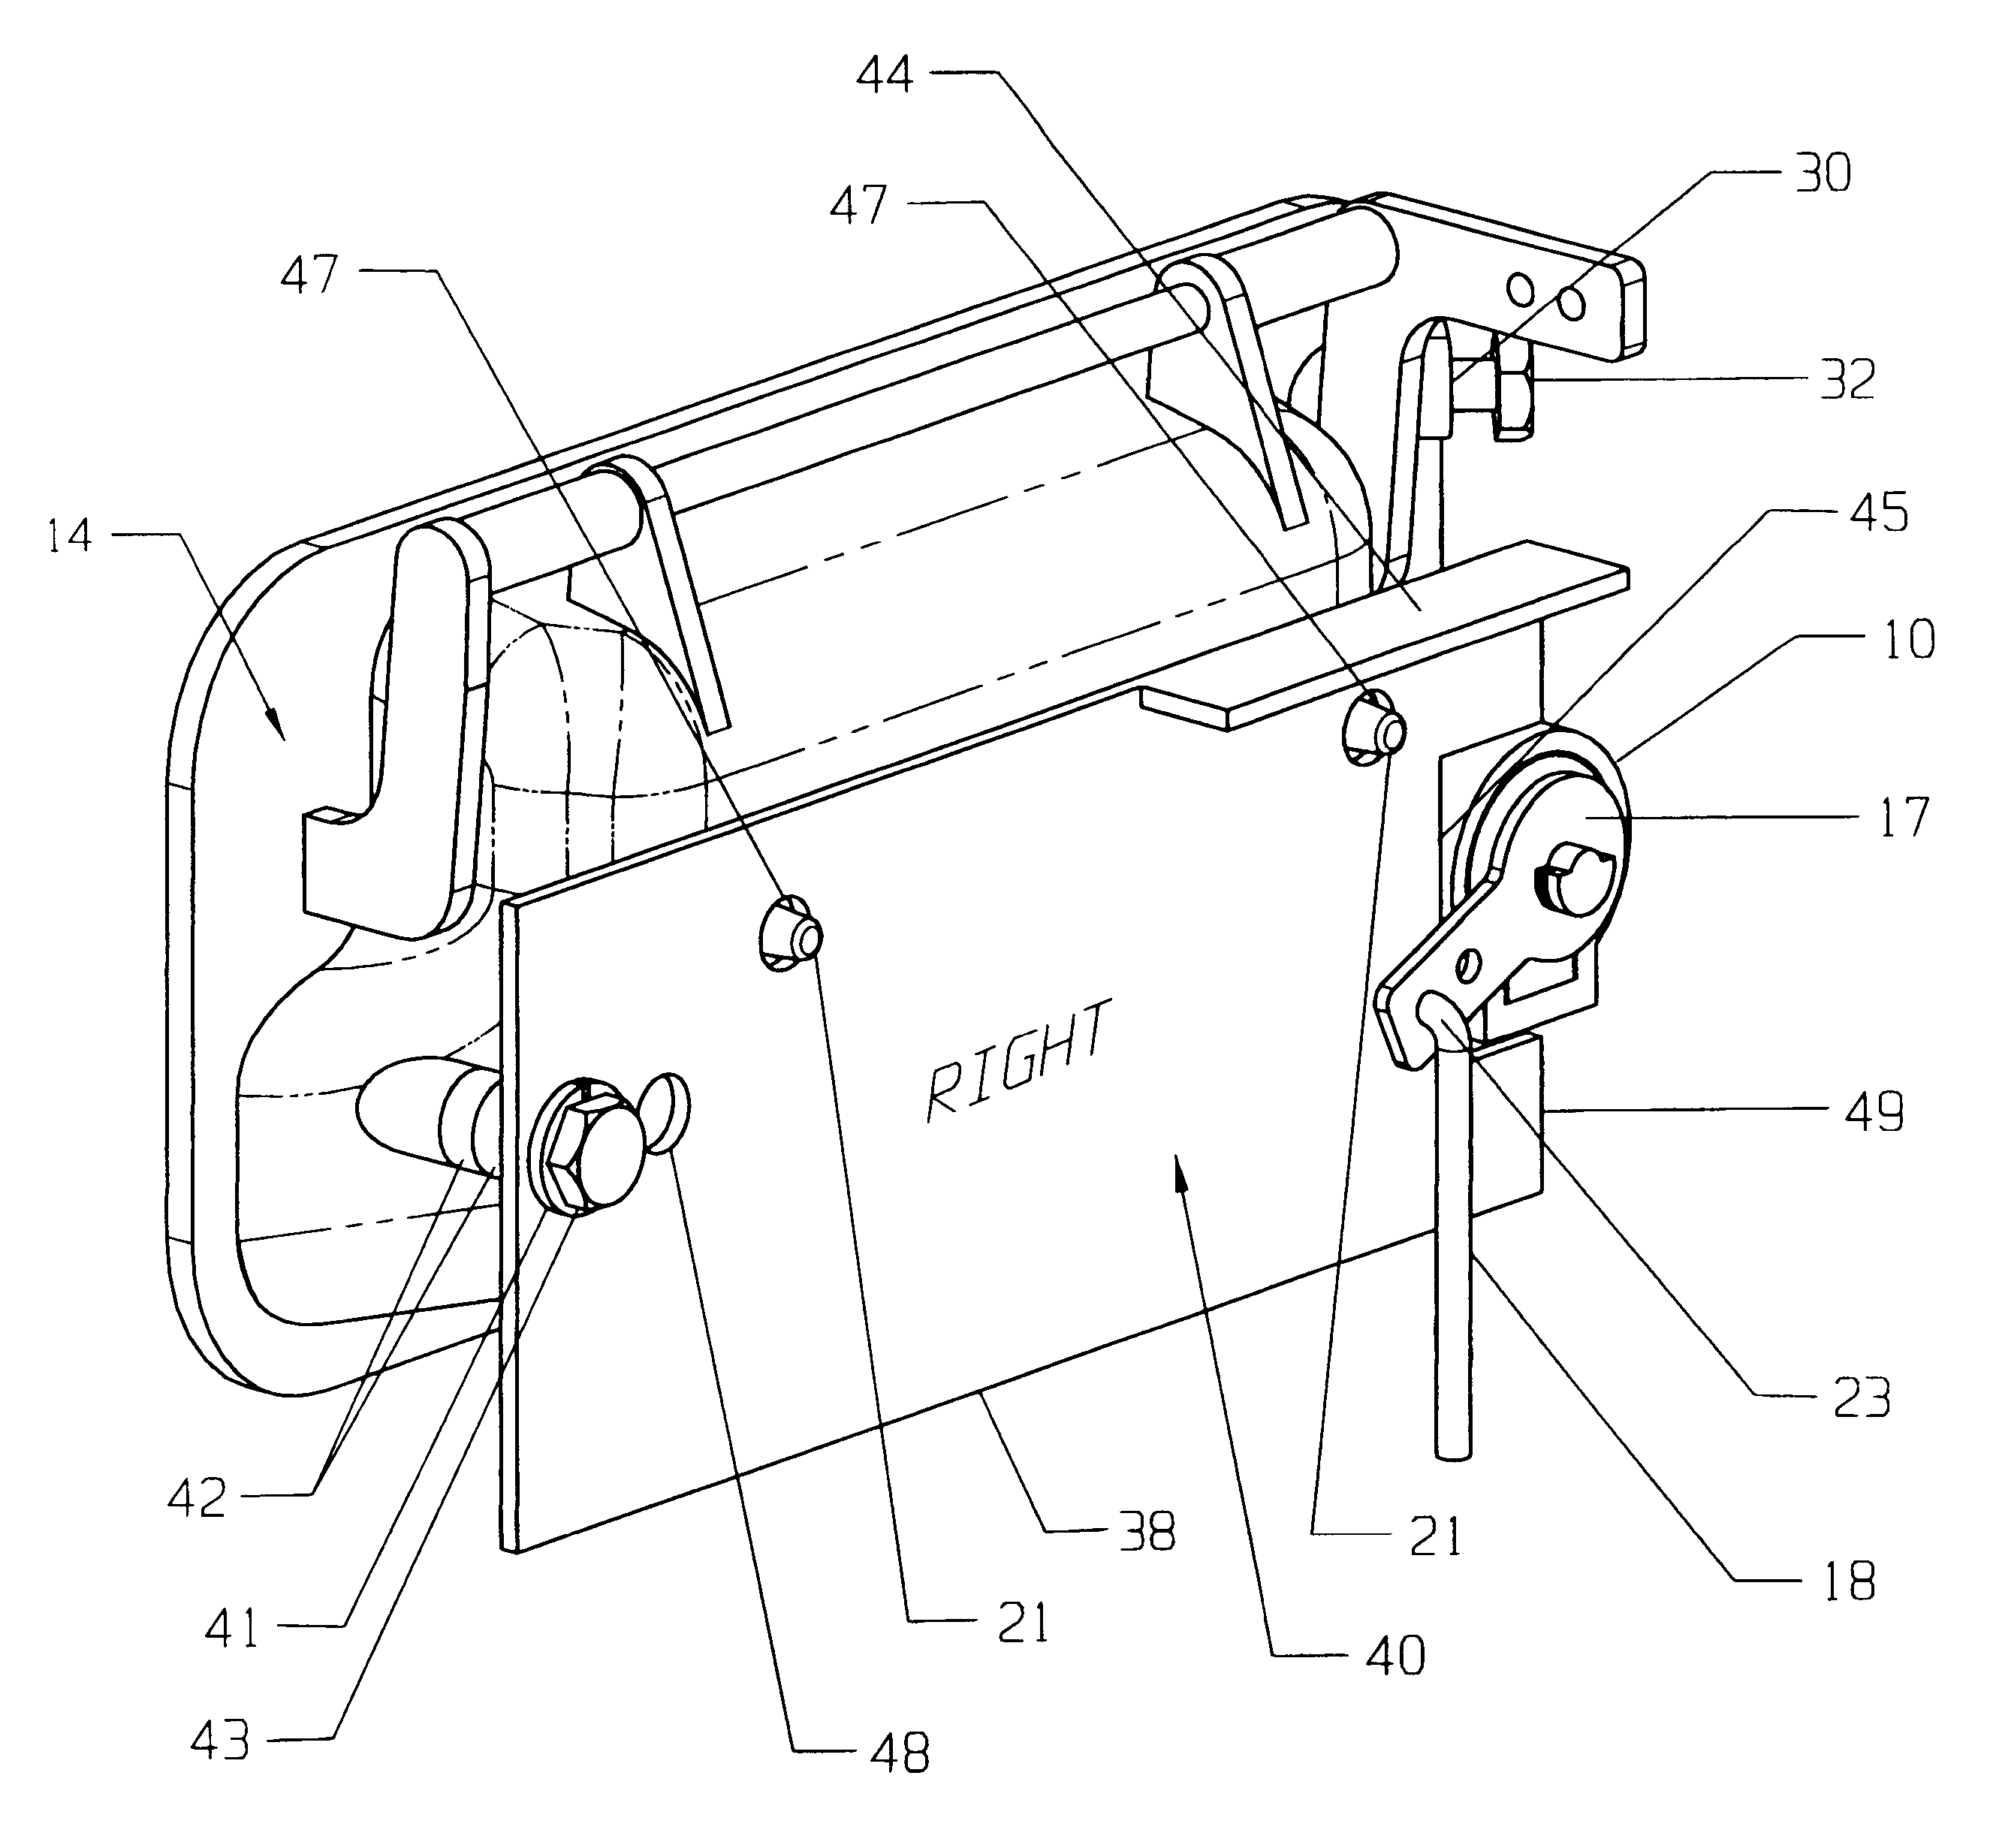 Vehicle security device